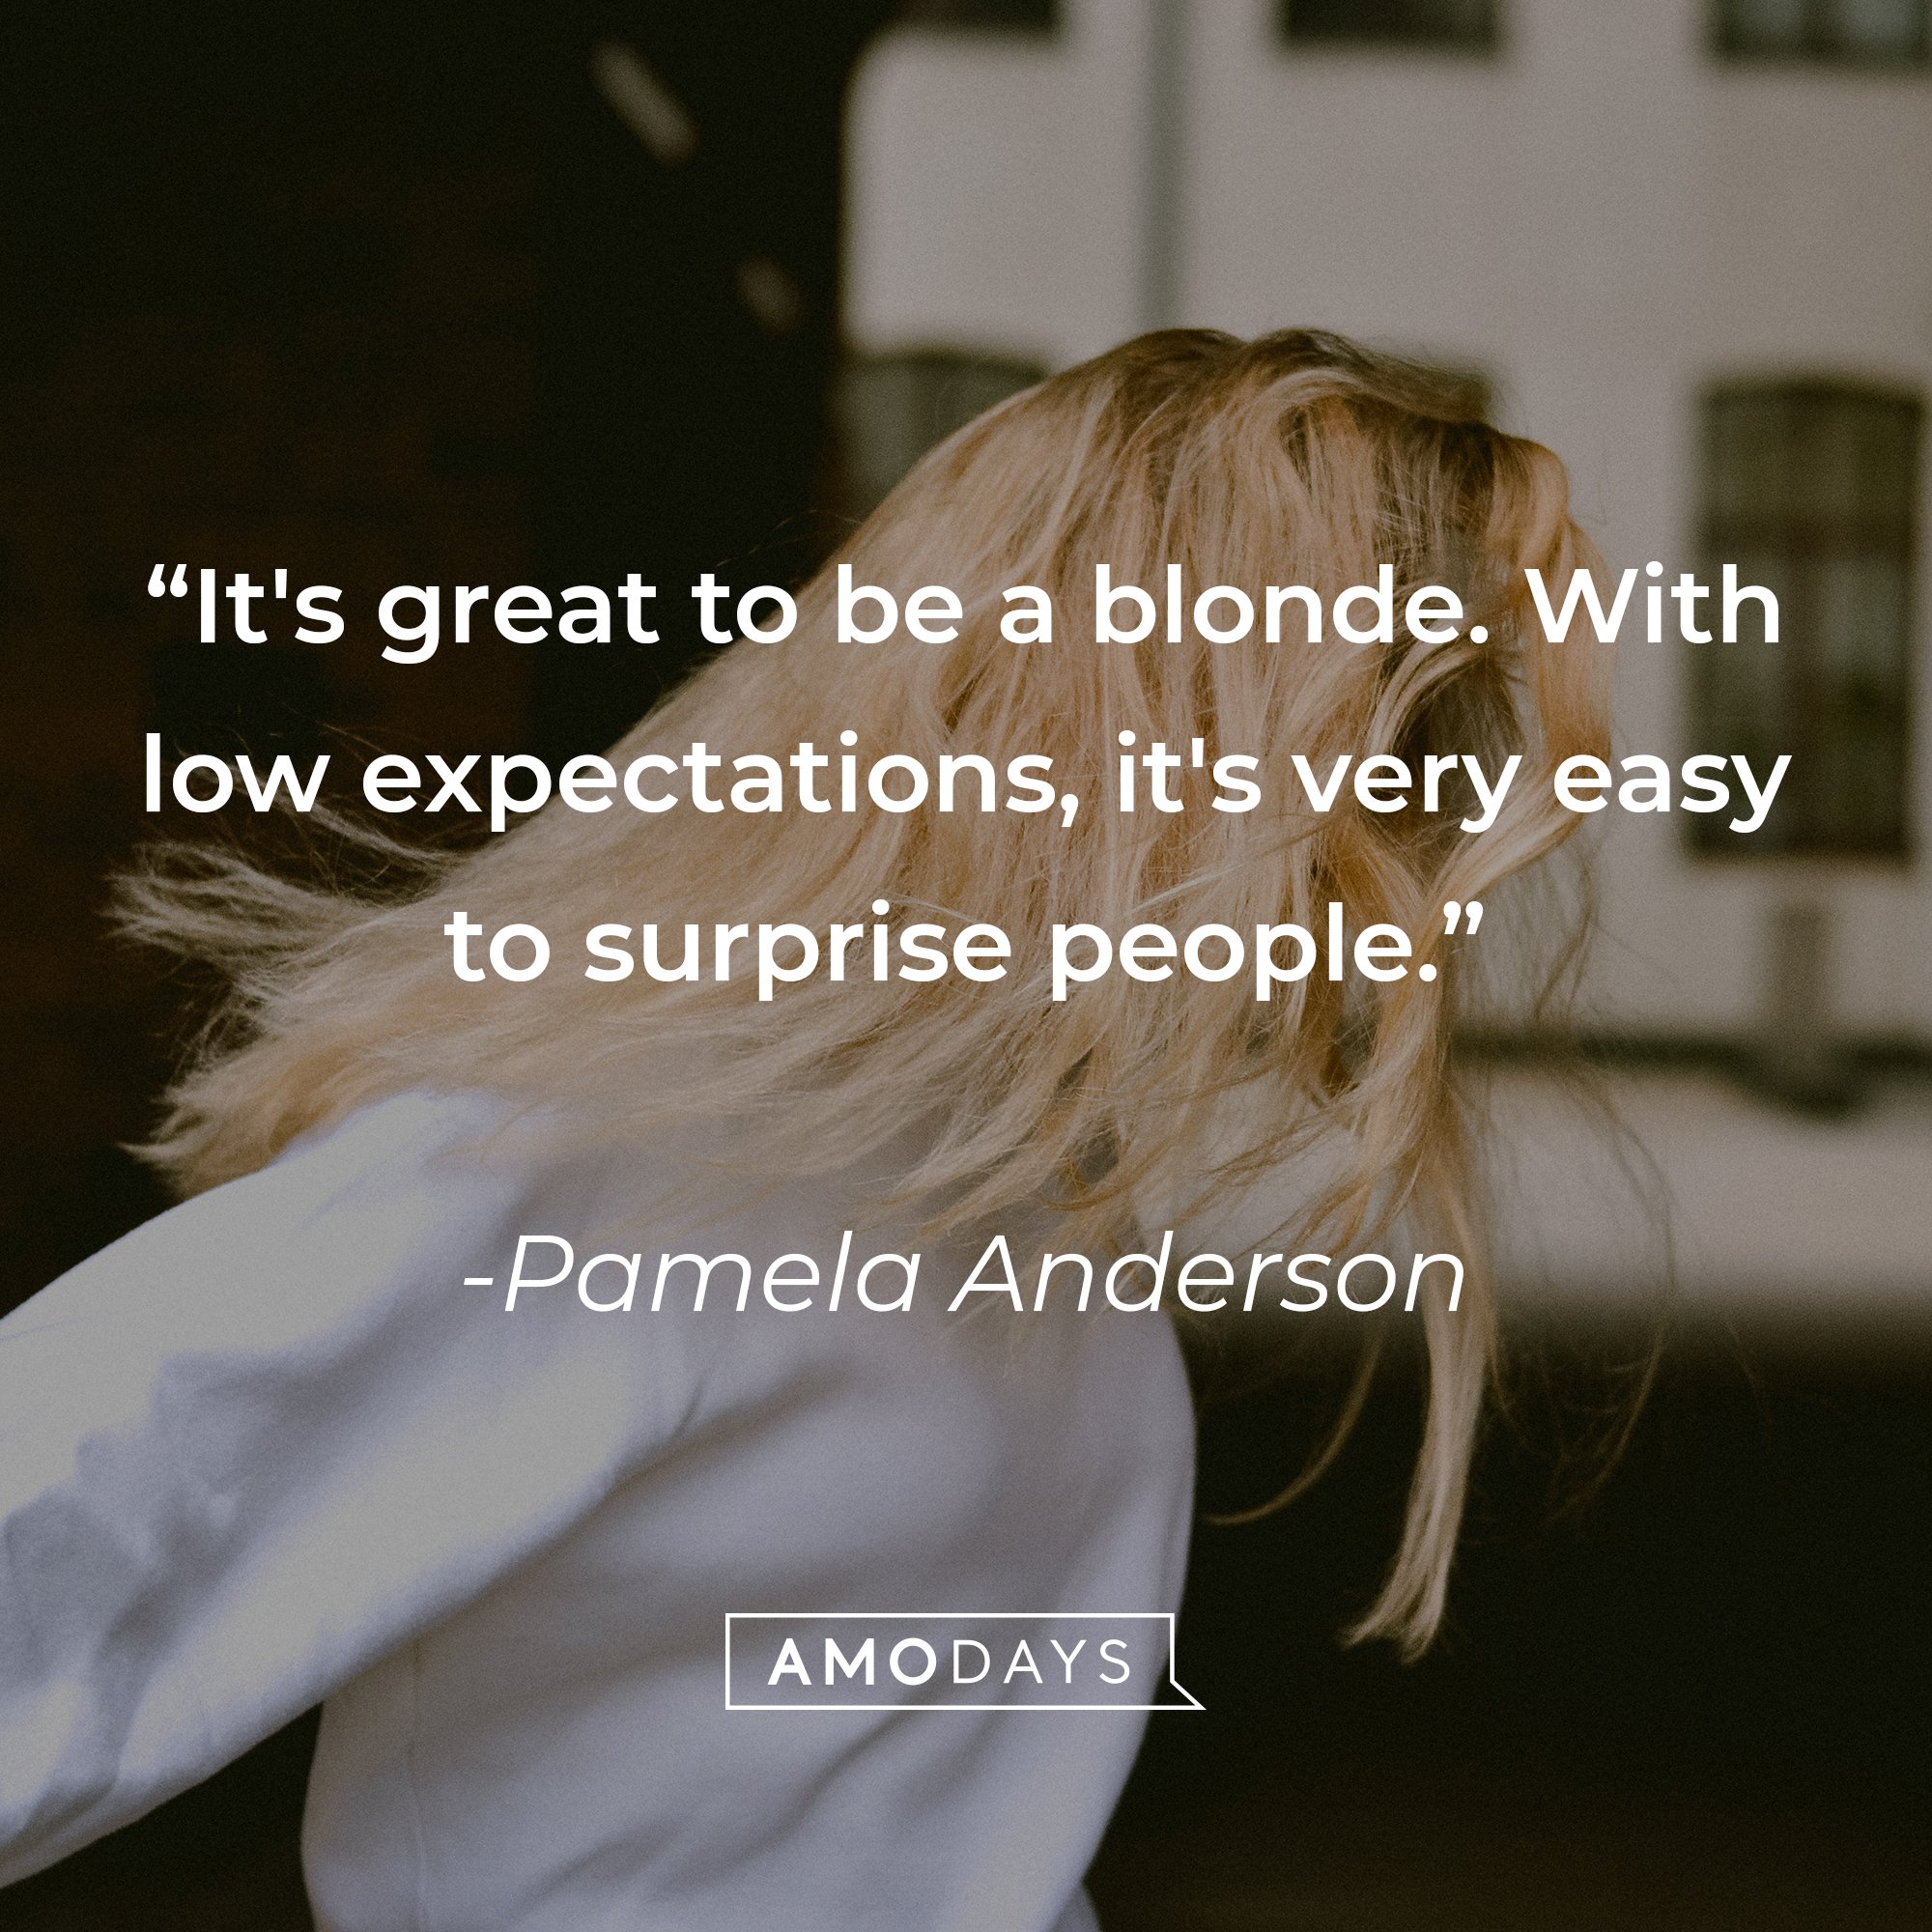 Pamela Anderson’s quote: "It's great to be a blonde. With low expectations, it's very easy to surprise people." | Image: AmoDays